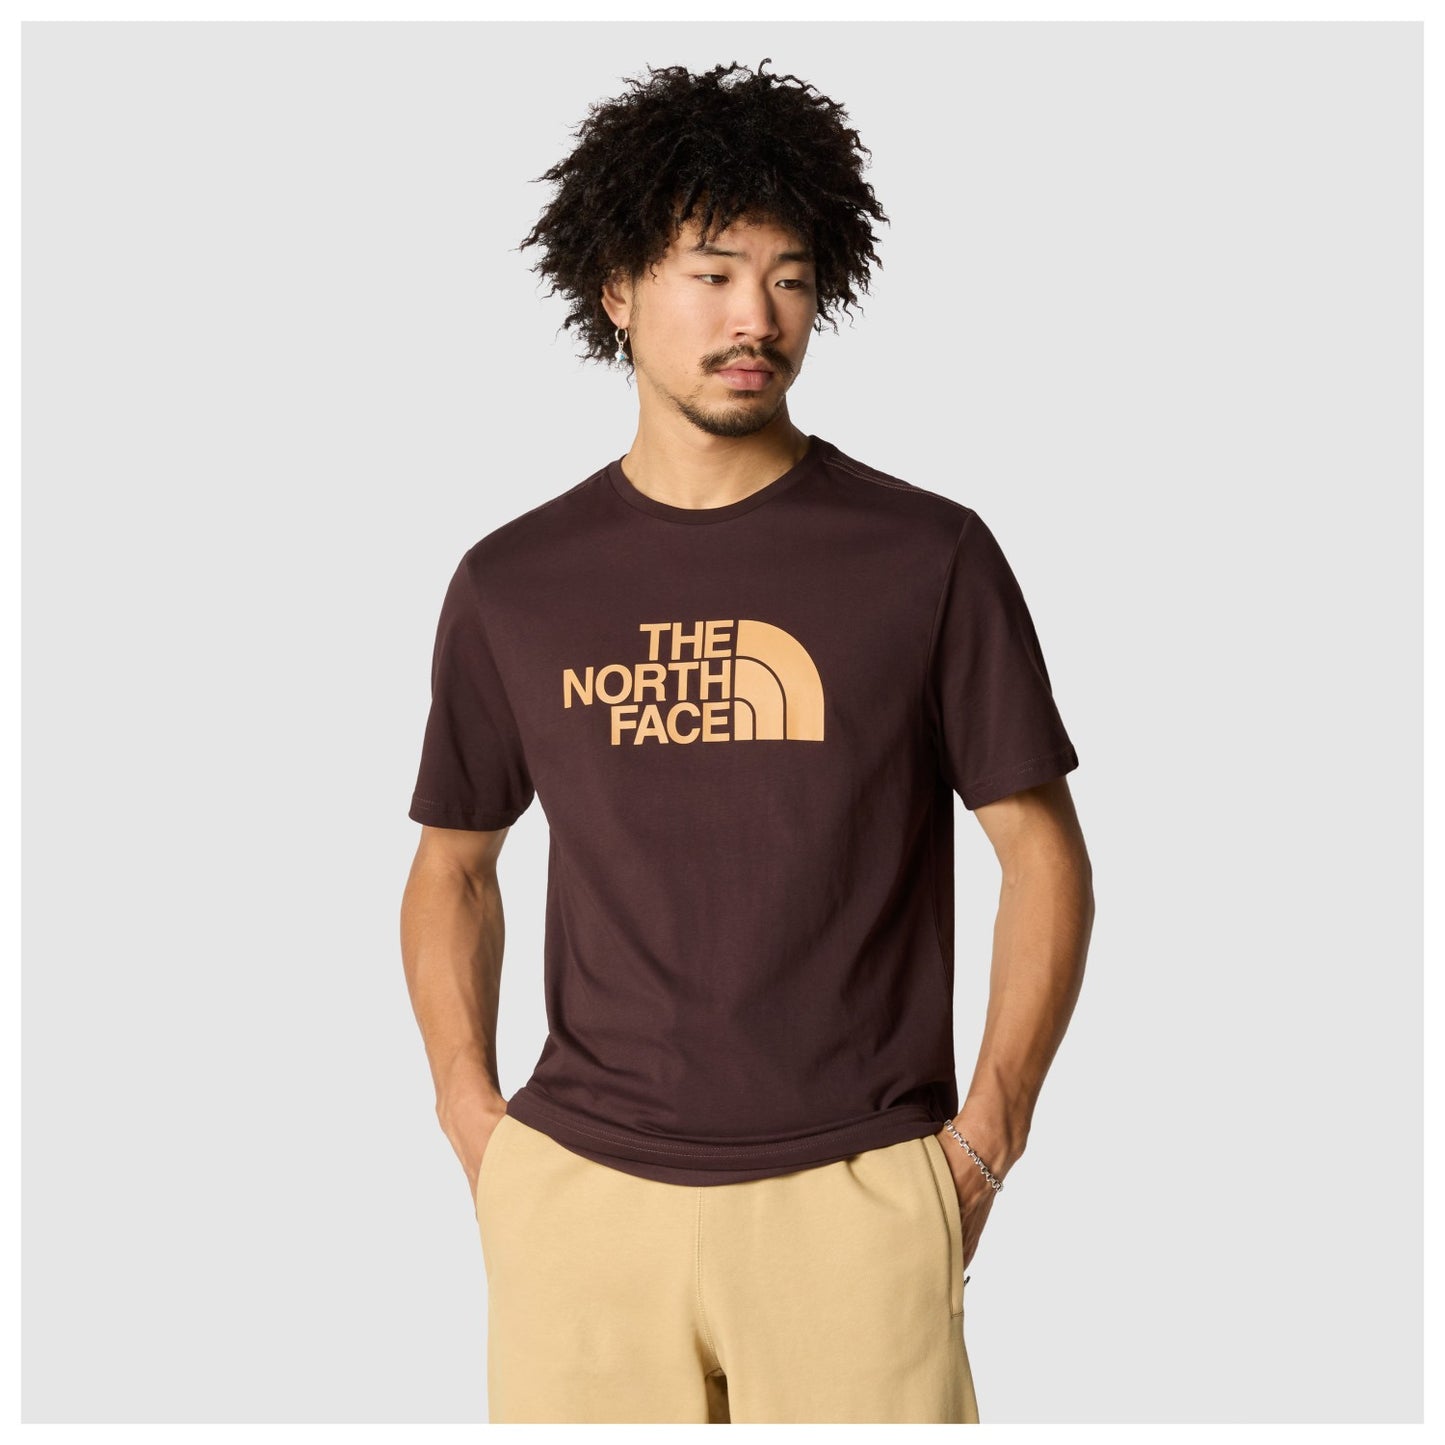 THE NORTH FACE EASY S/S TEE-BROWN